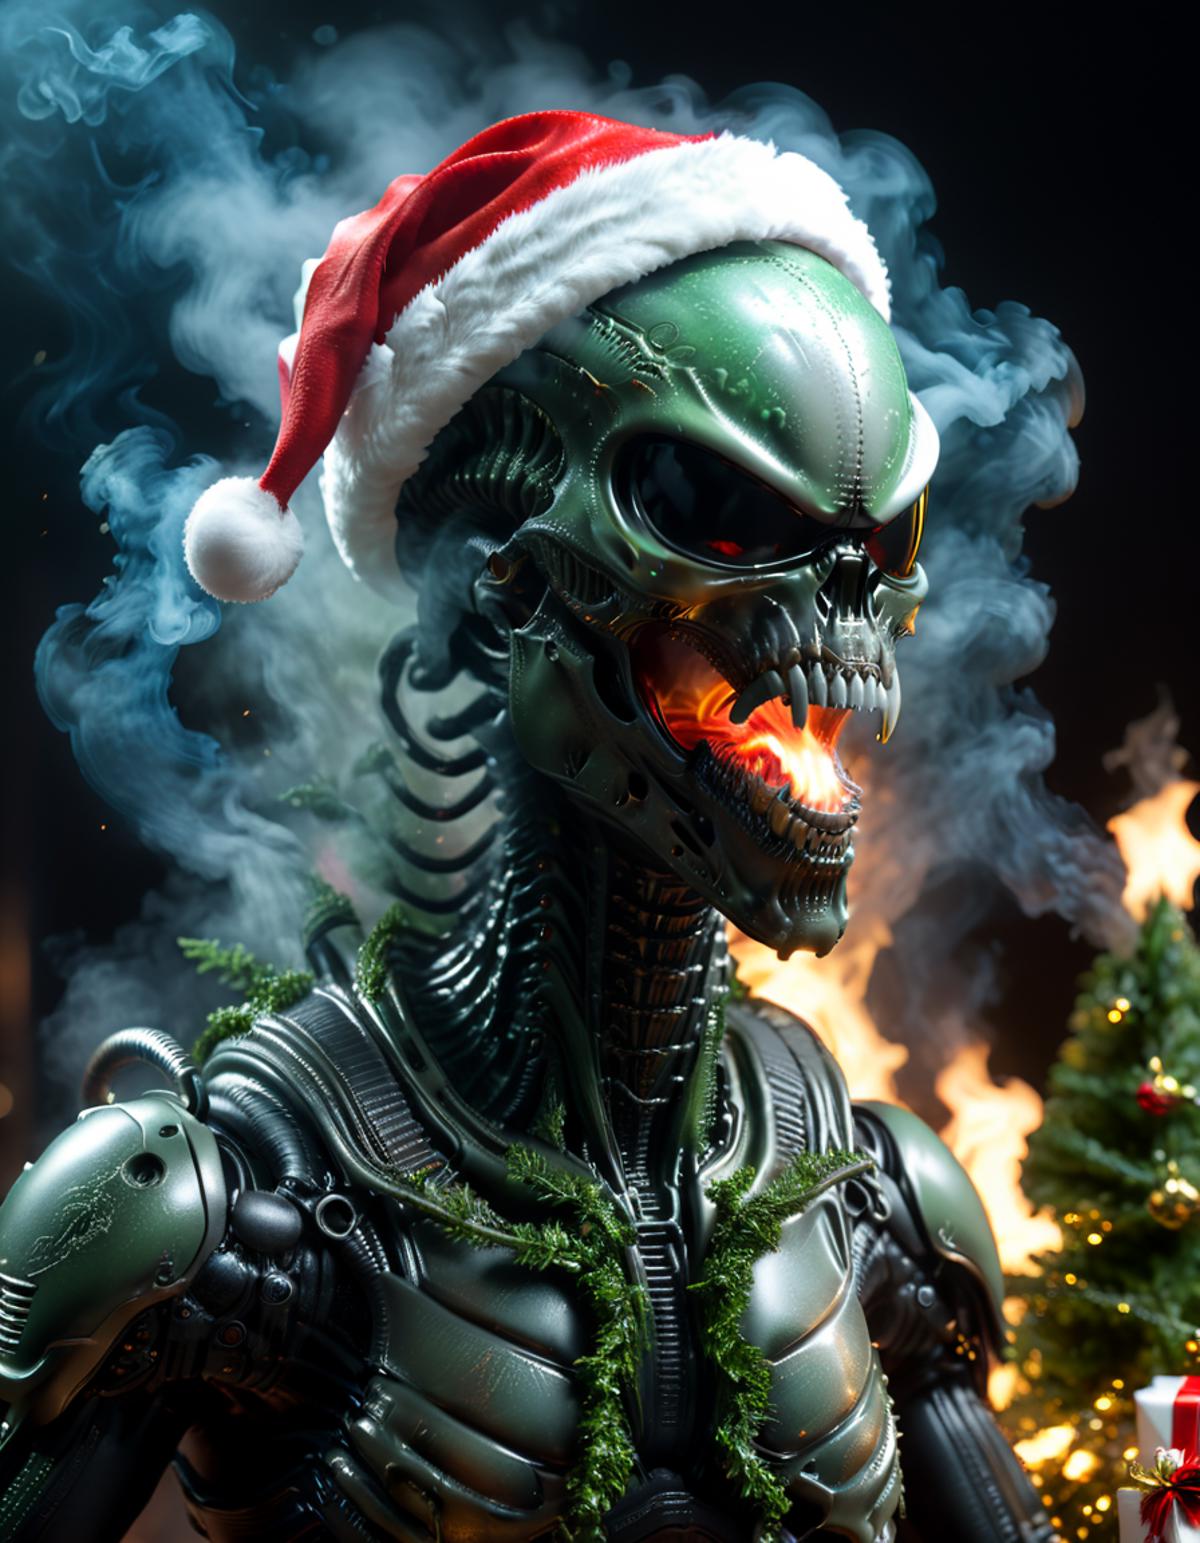 Alien with a Santa hat and green smoke in the background.